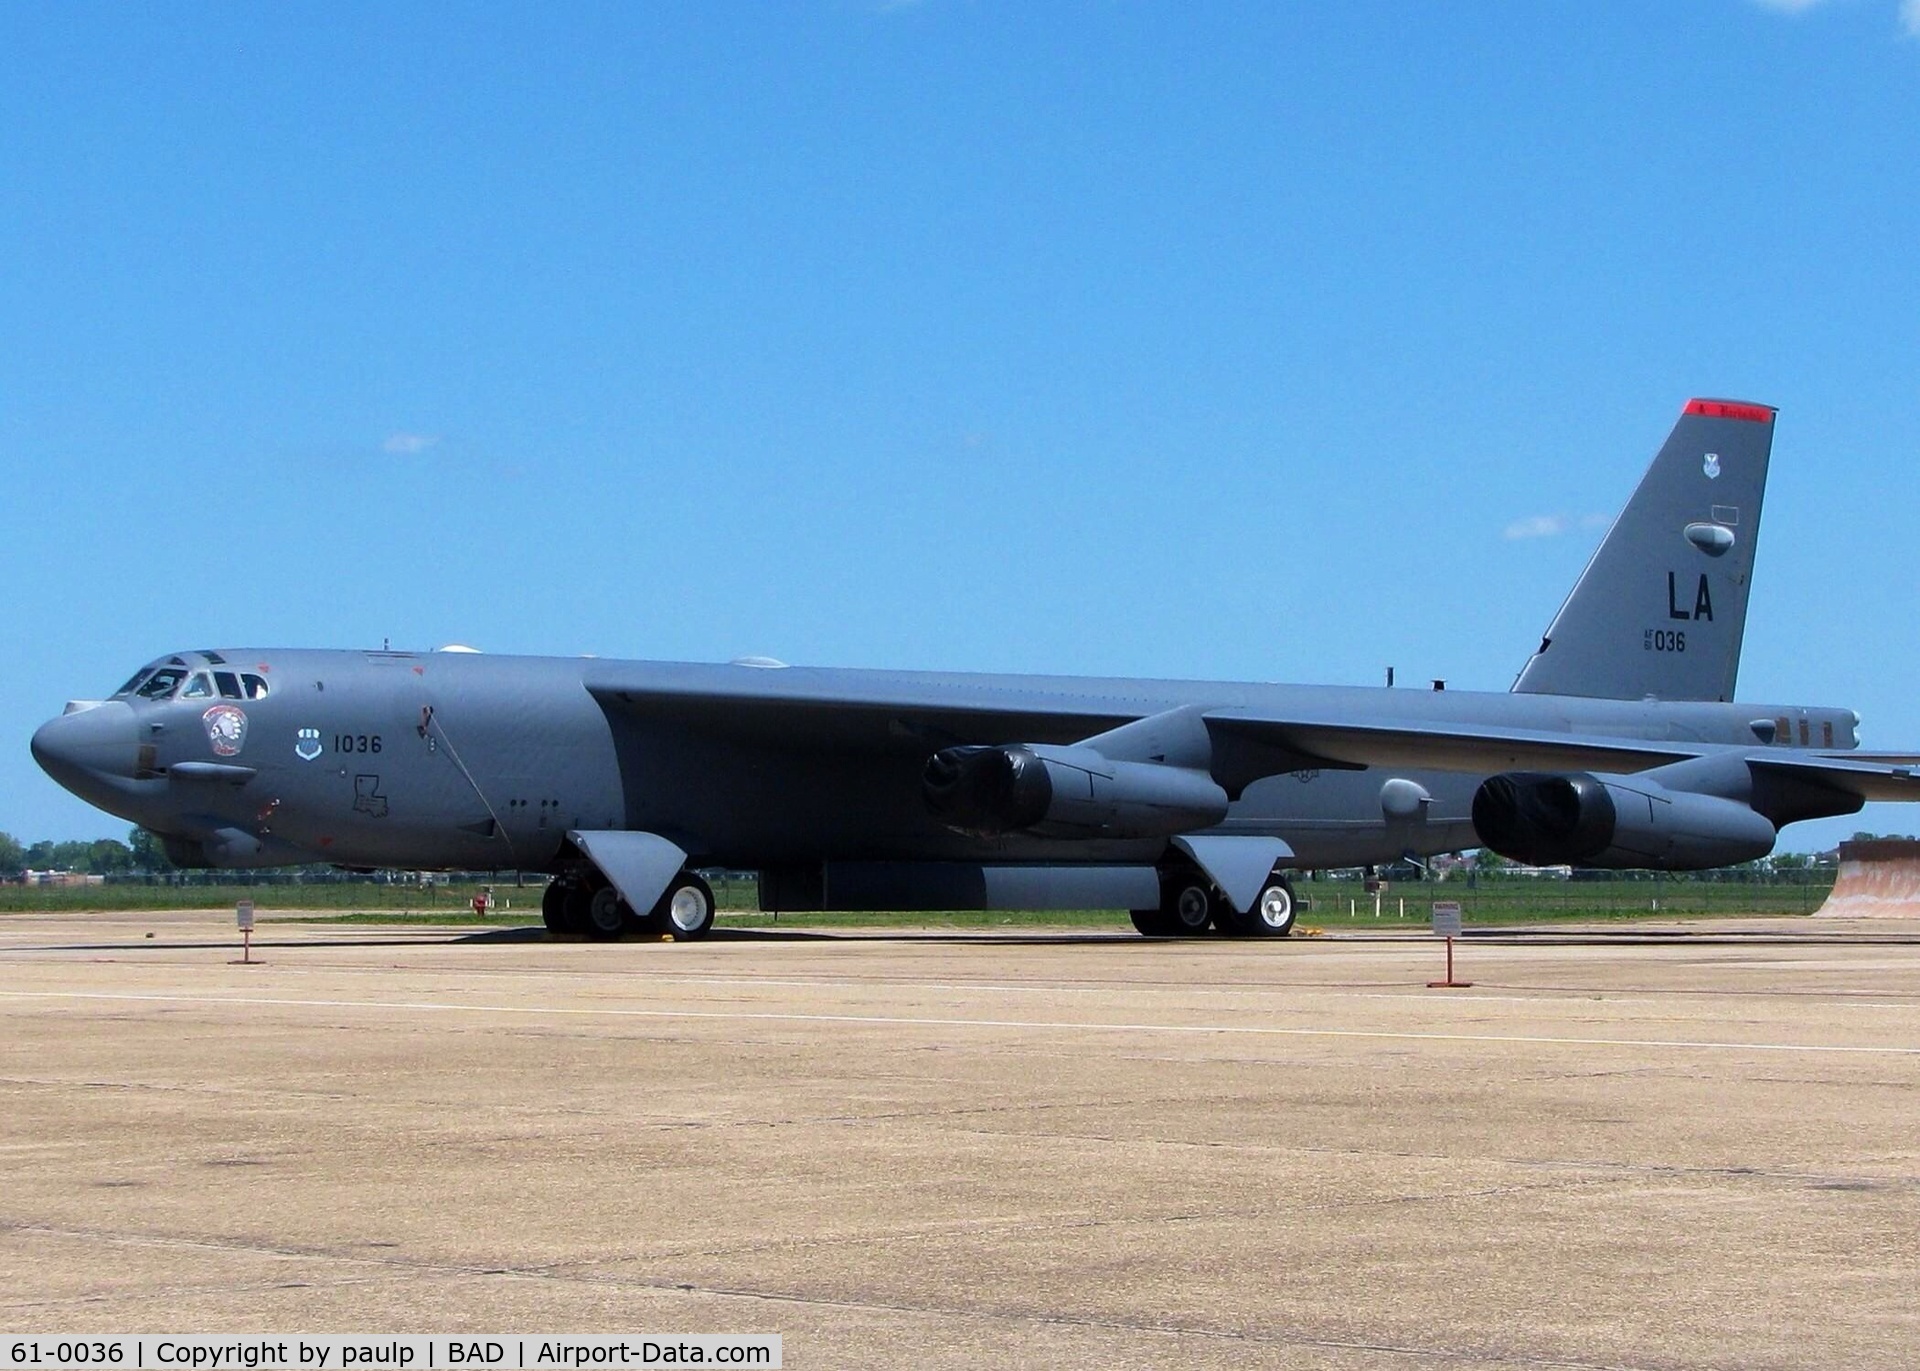 61-0036, 1961 Boeing B-52H Stratofortress C/N 464463, At Barksdale Air Force Base.